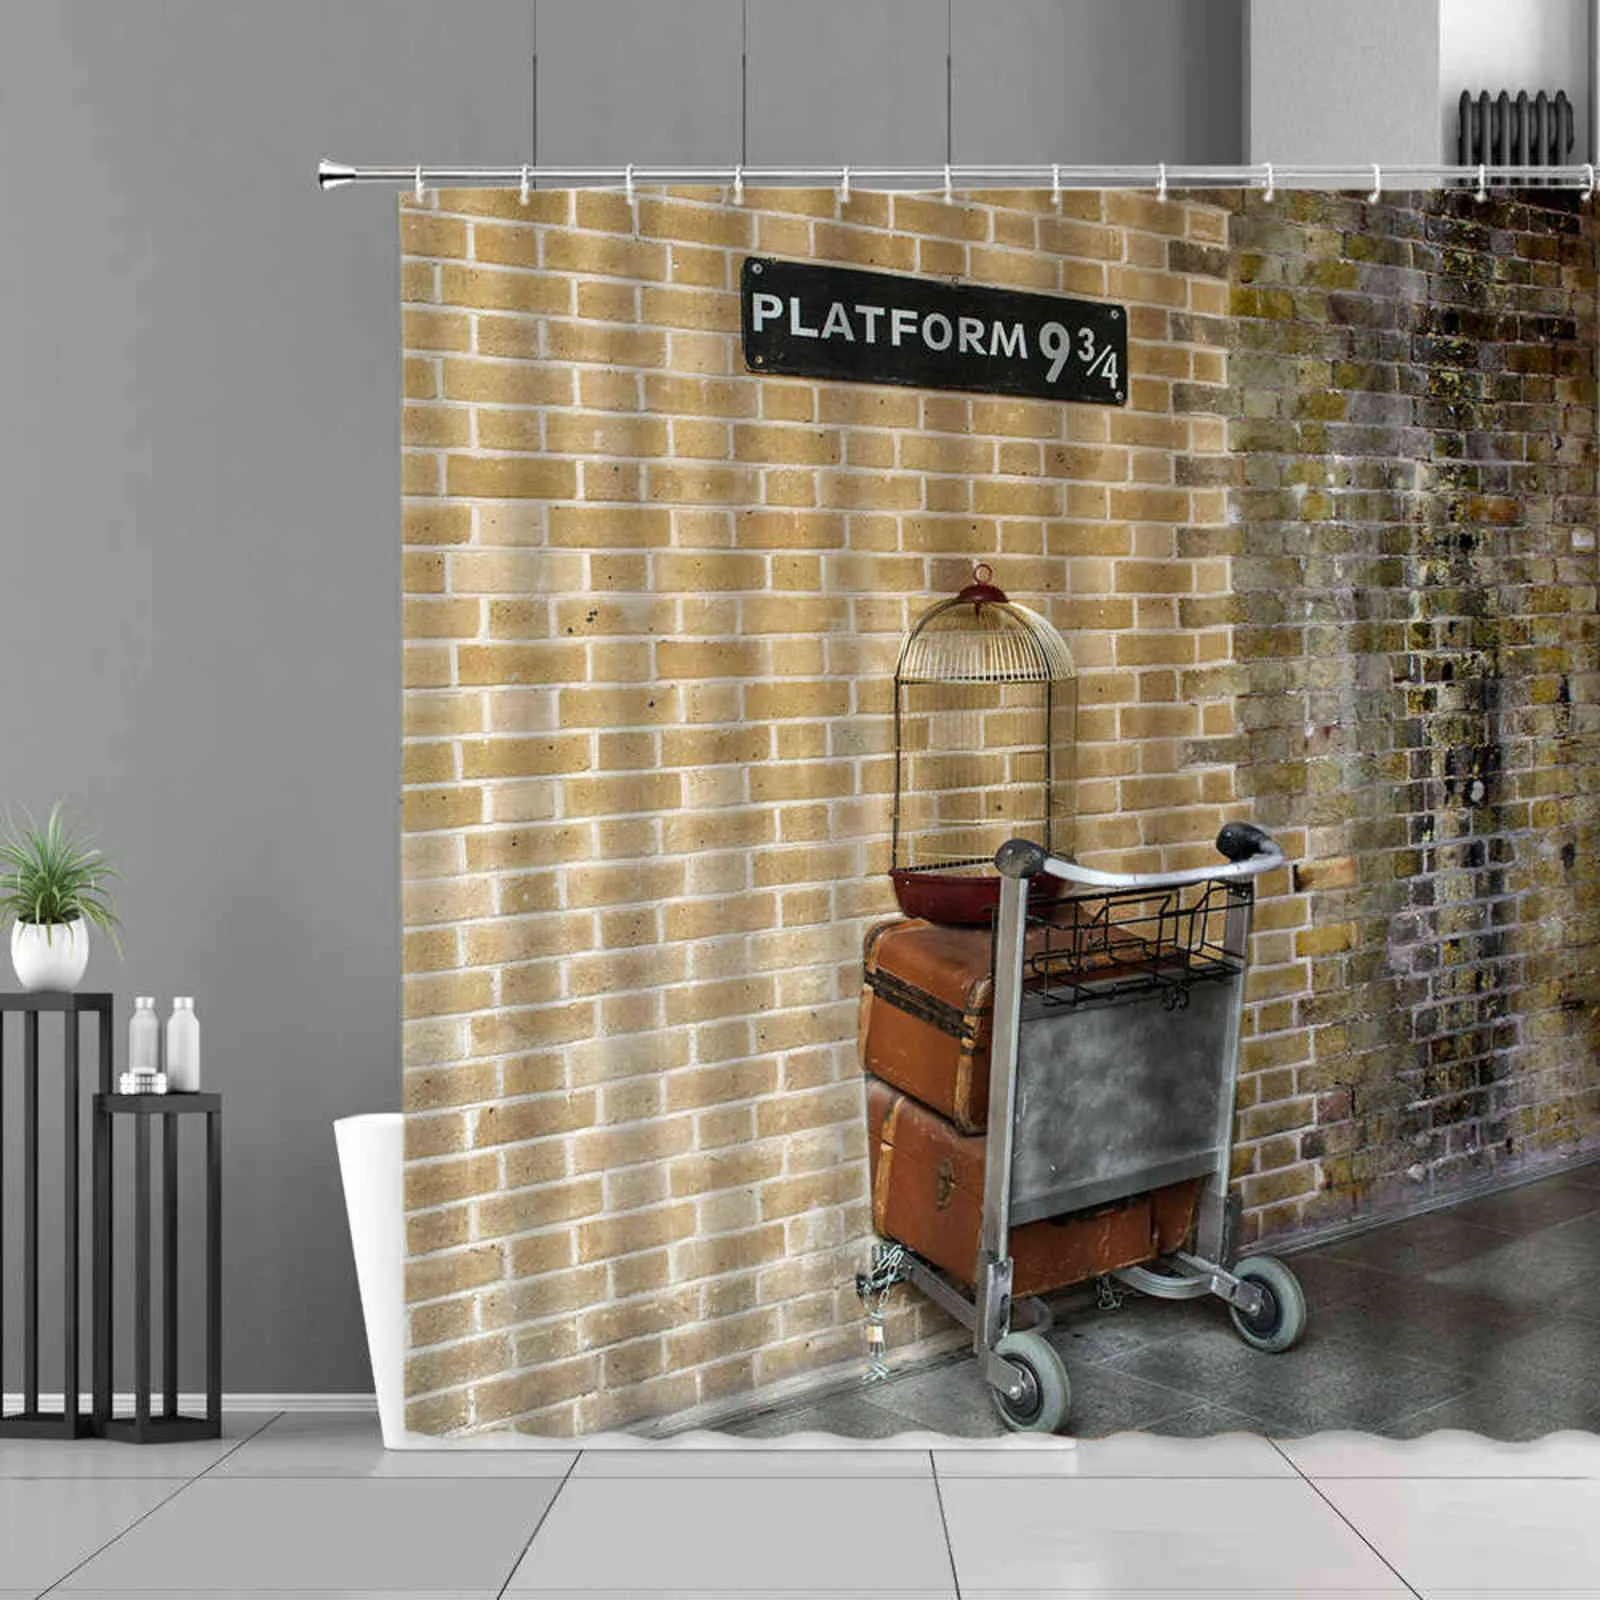 Platform 9 And 3/4 Shower Curtains Secret Passage Of King's Cross Railway Station Stone Wall Brick Pattern Bathroom Curtains 211116